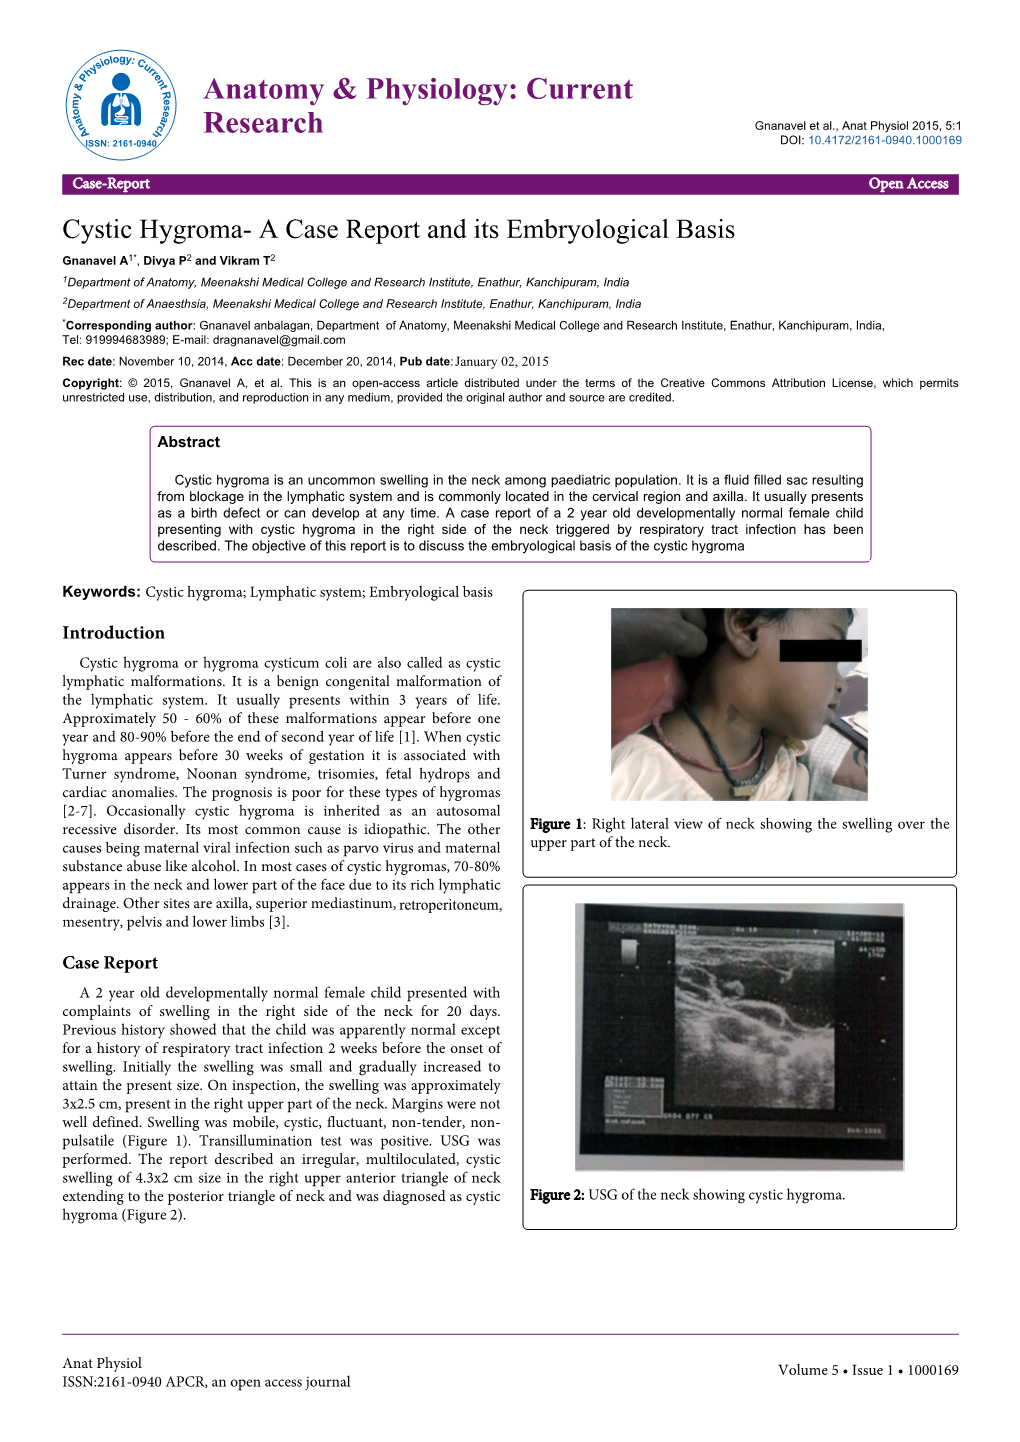 Cystic Hygroma- a Case Report and Its Embryological Basis